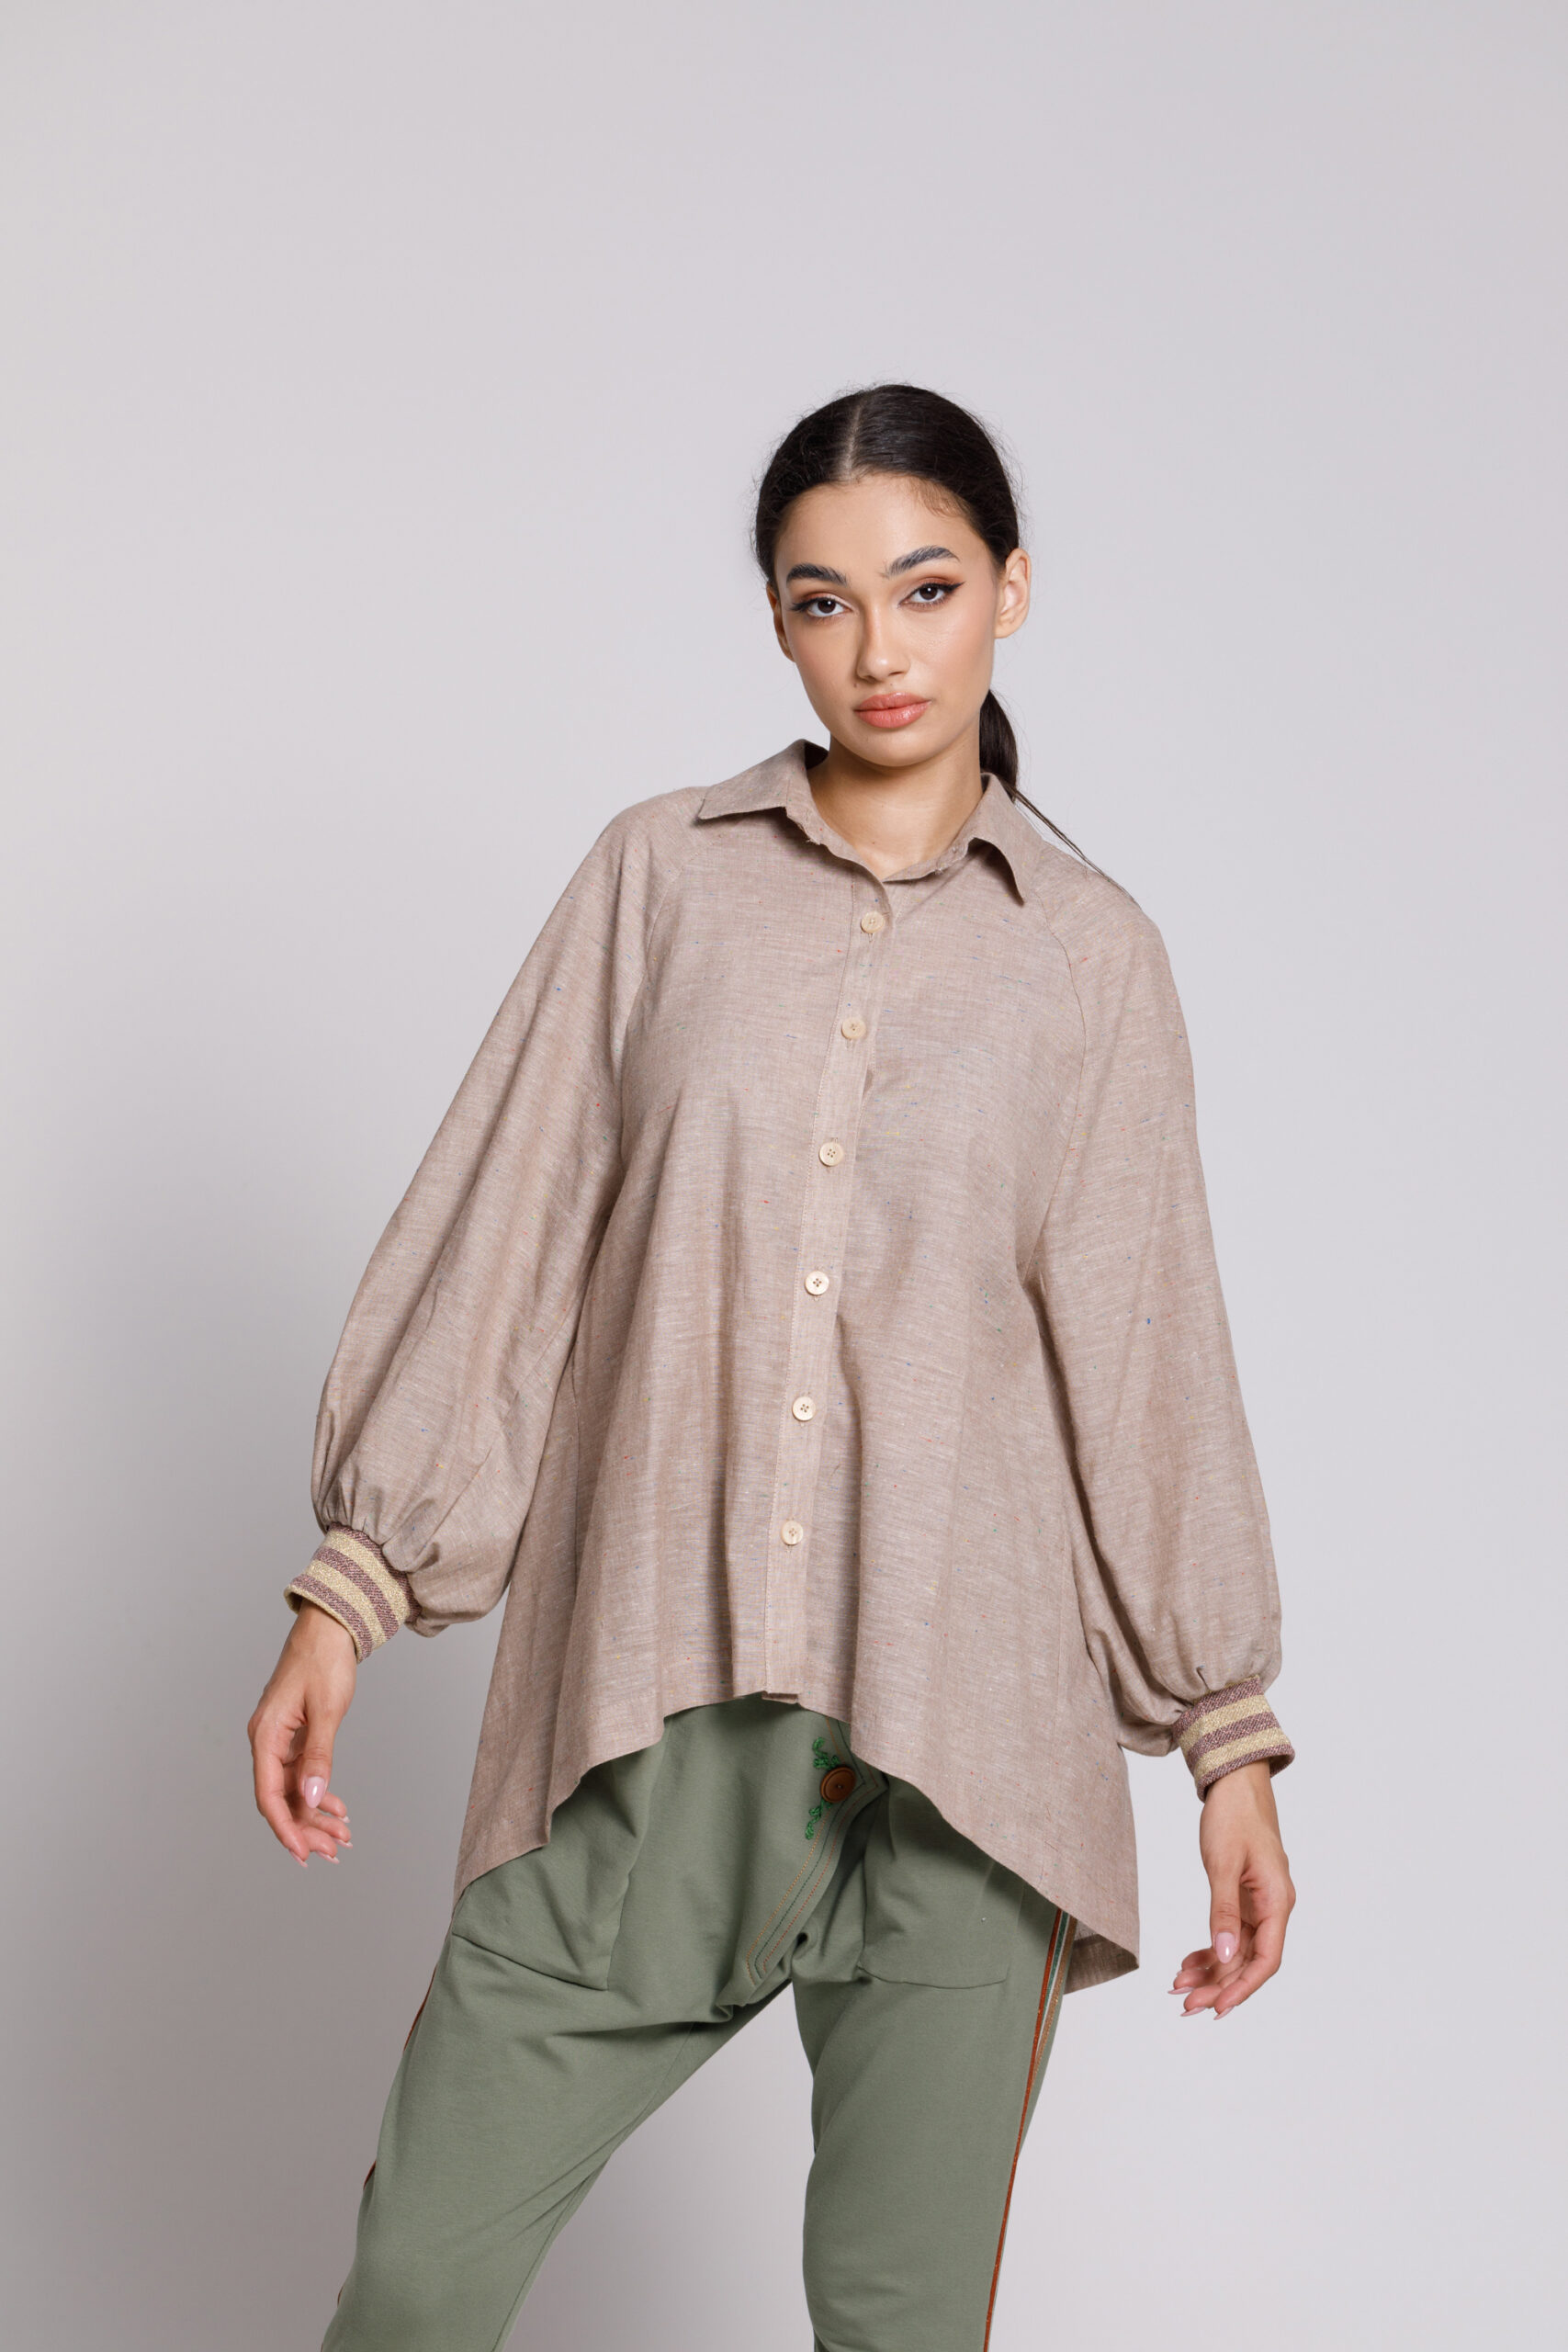 MARINA Versatile shirt in cream with floral embroidery. Natural fabrics, original design, handmade embroidery